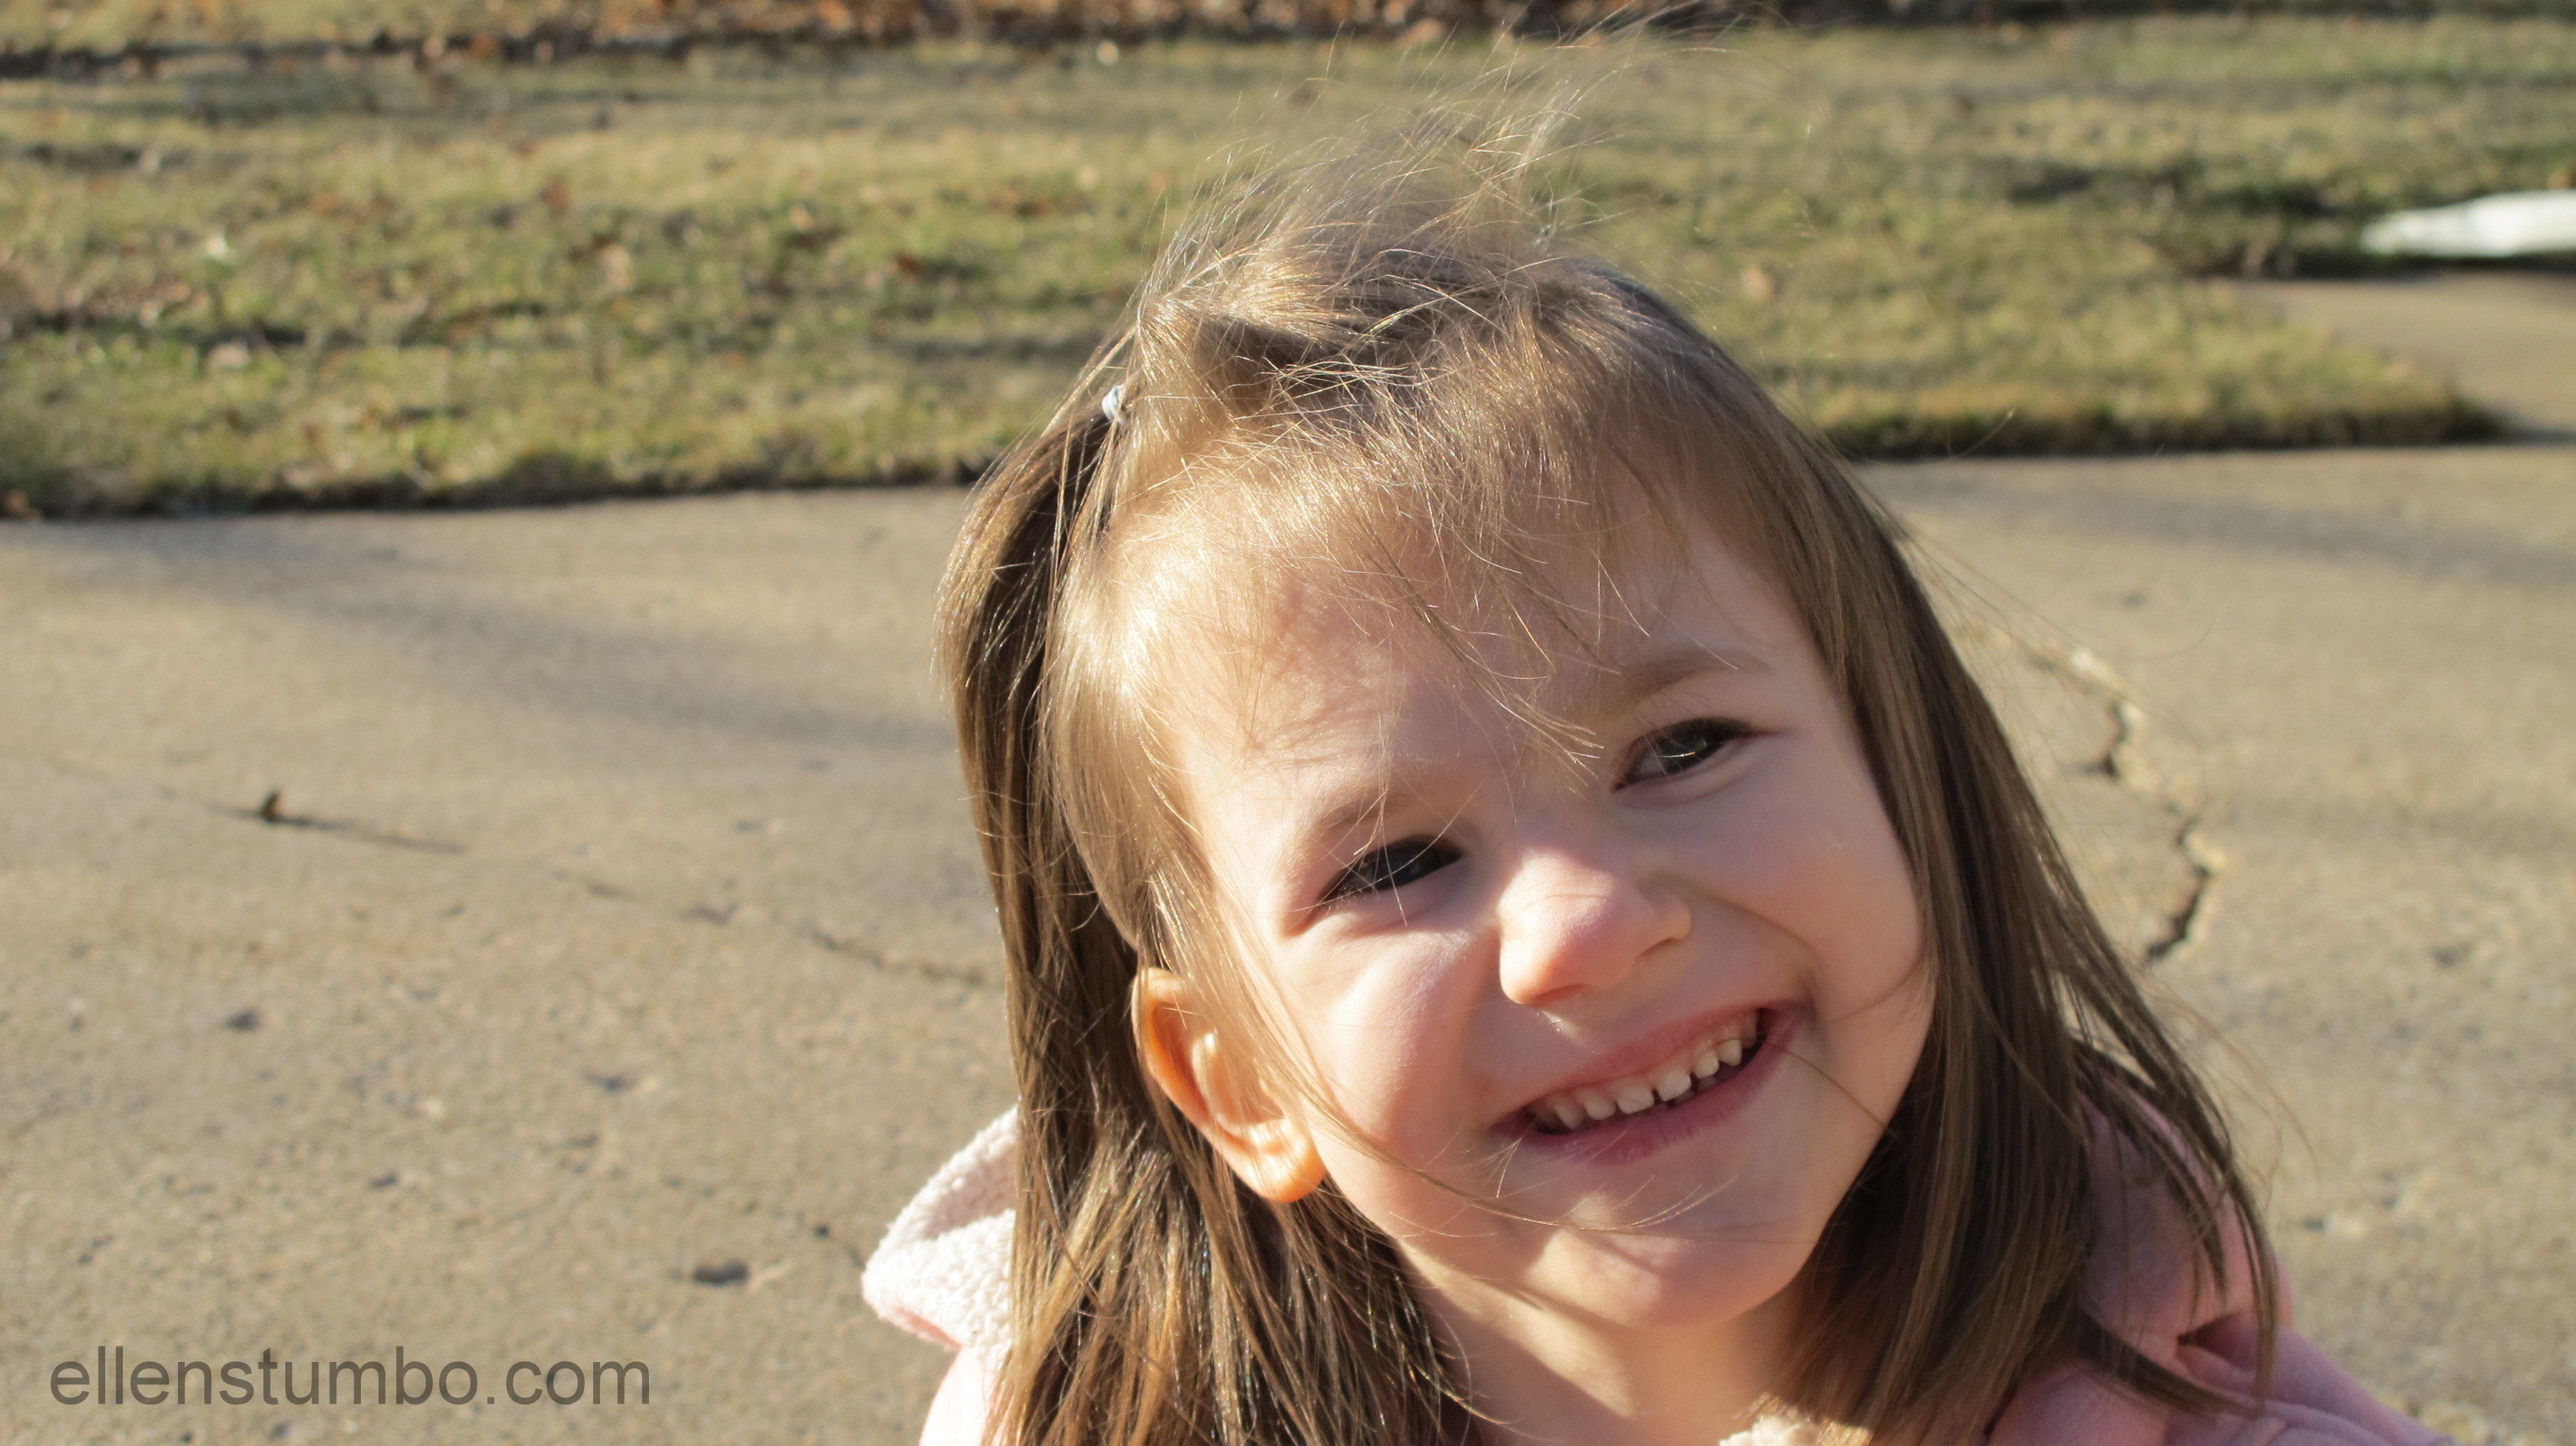 When adoption breaks my heart for my daughter